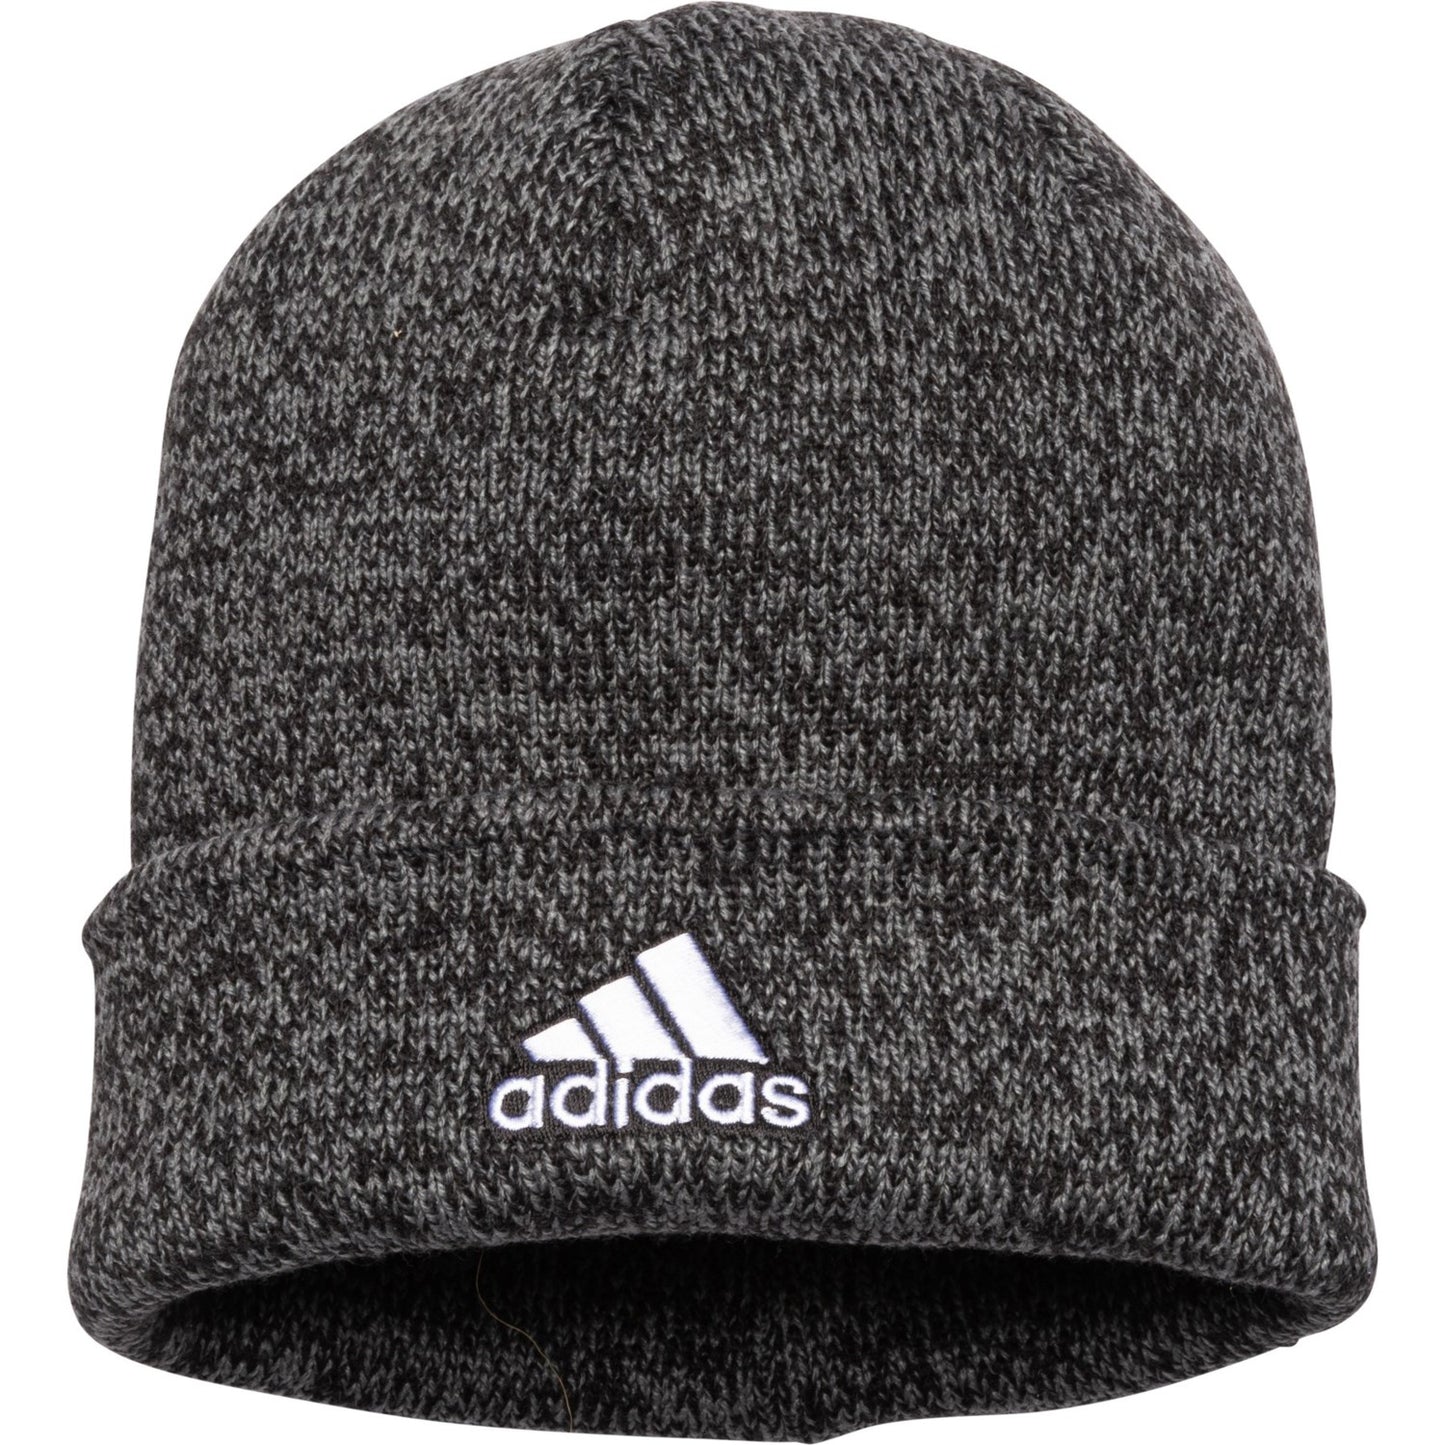 Adidas Men's Team Issue Fold Beanie Double Layer Soft Knit Winter Hat